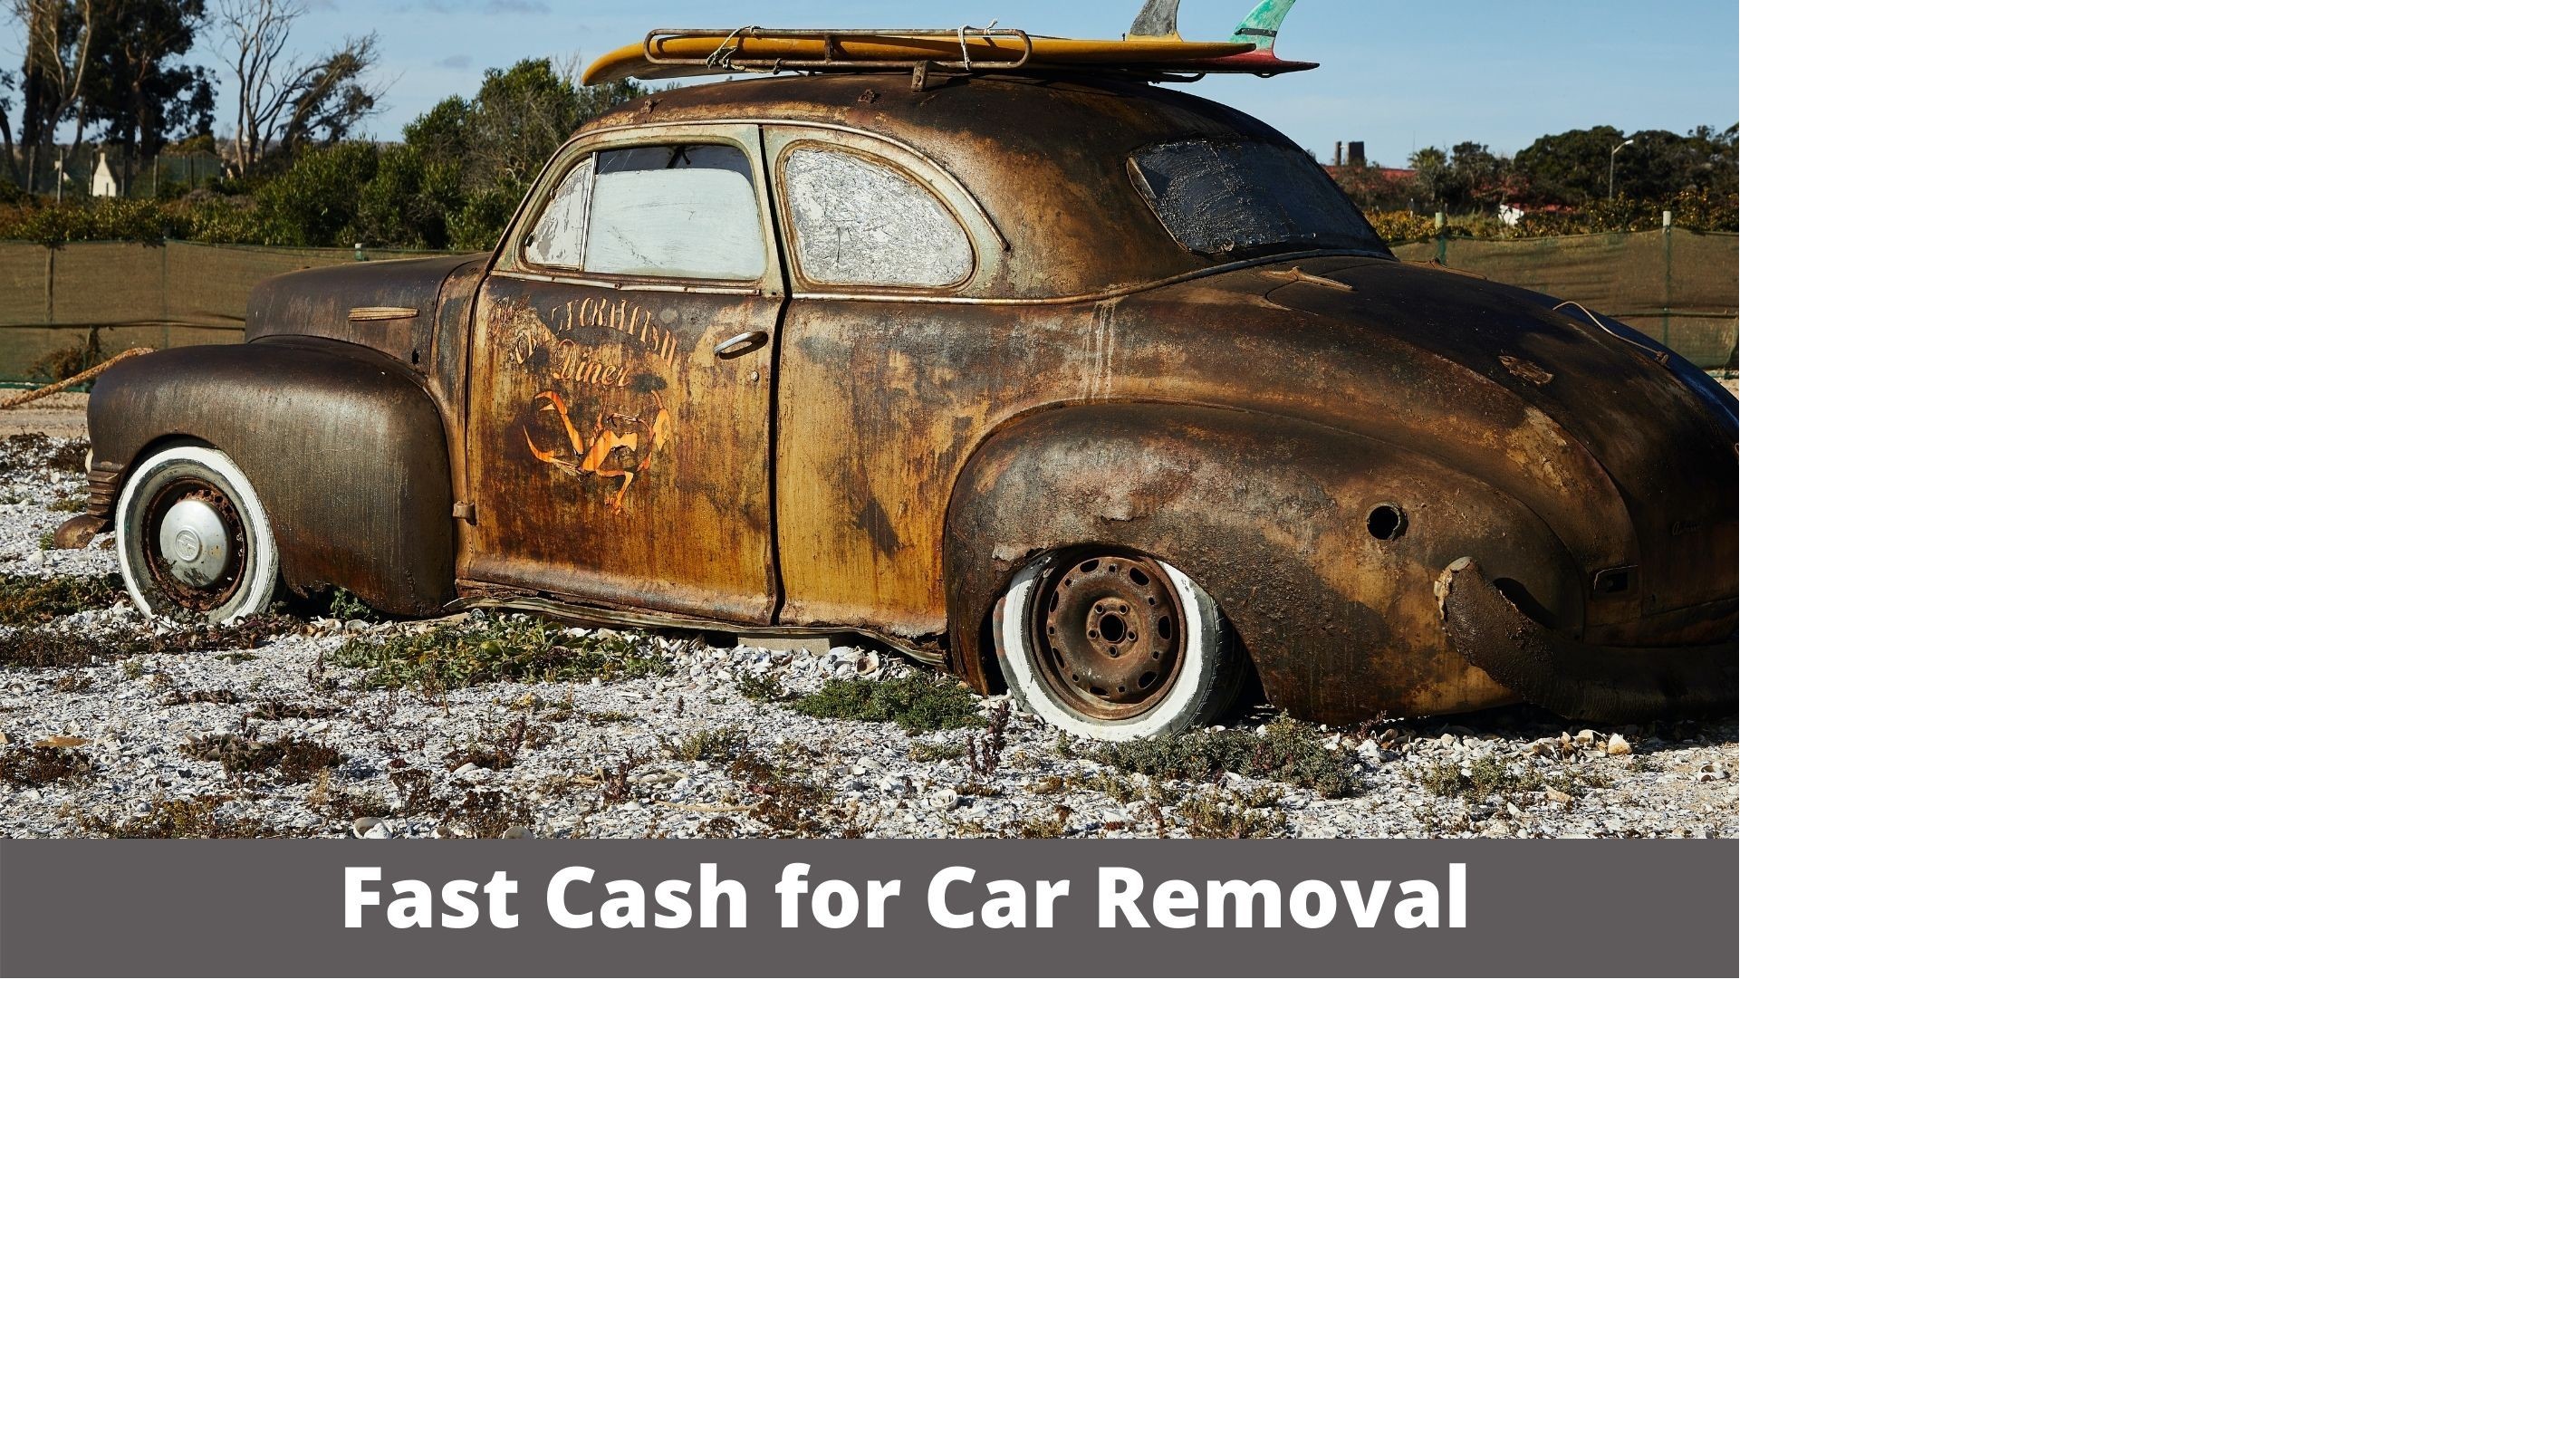 Get cash for your junk cars